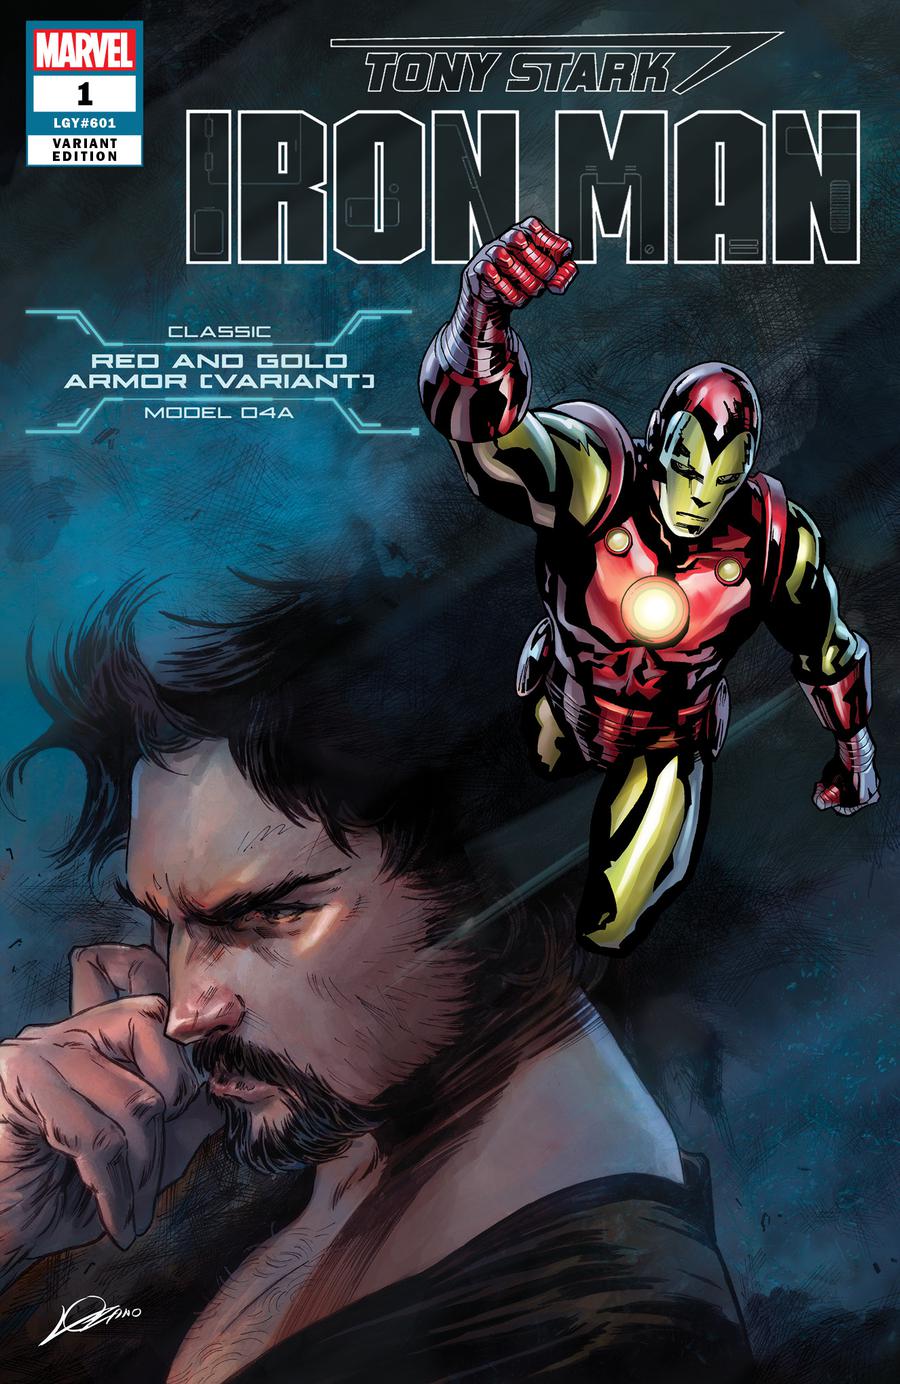 Tony Stark Iron Man #1 Cover N Variant Alexander Lozano & Valerio Schiti Model 04A Classic Red And Gold Armor Variant Cover